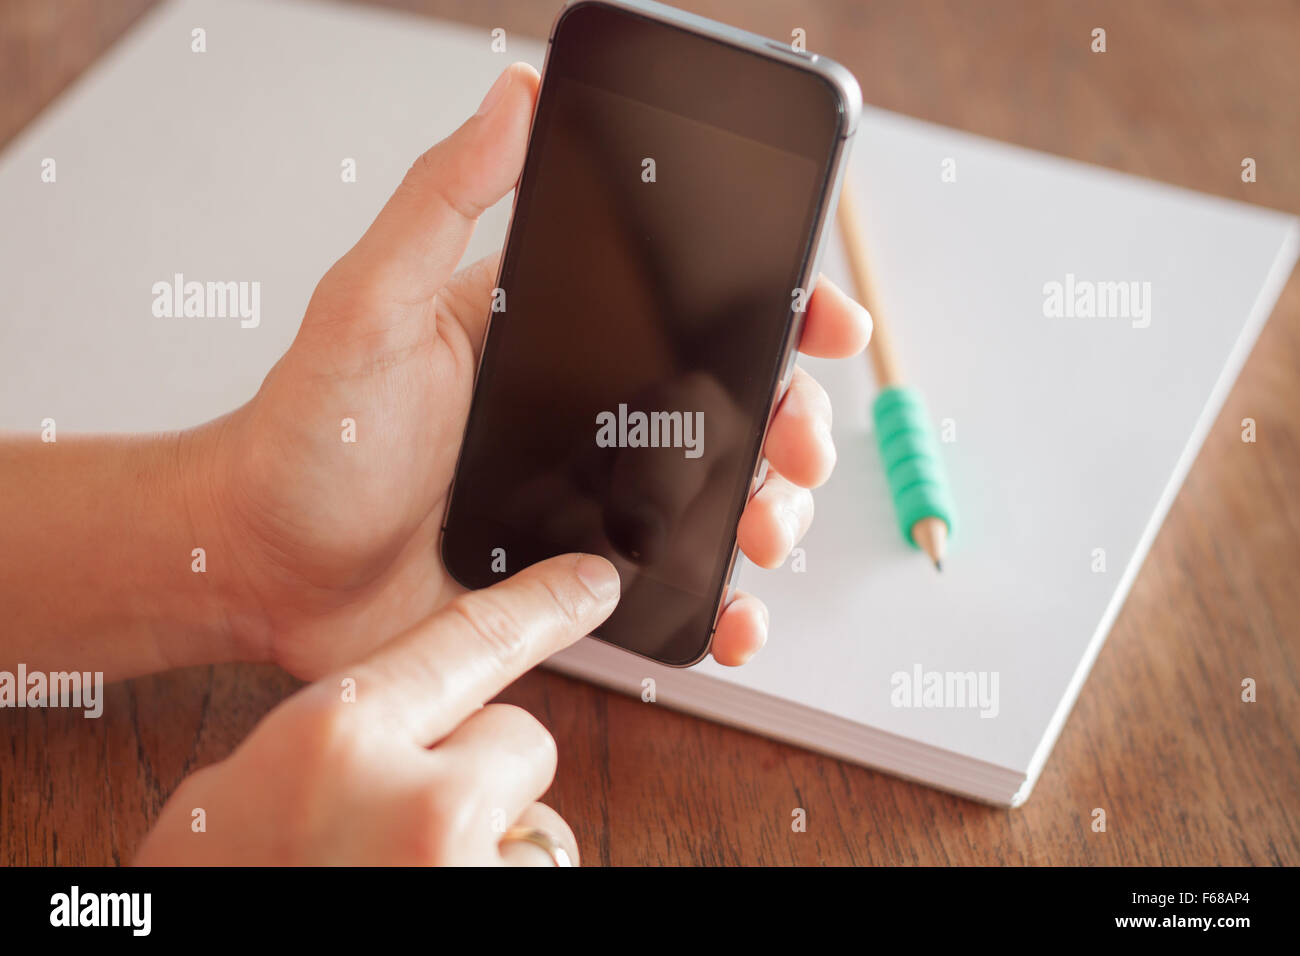 Smart phone in a woman's hand, stock photo Stock Photo